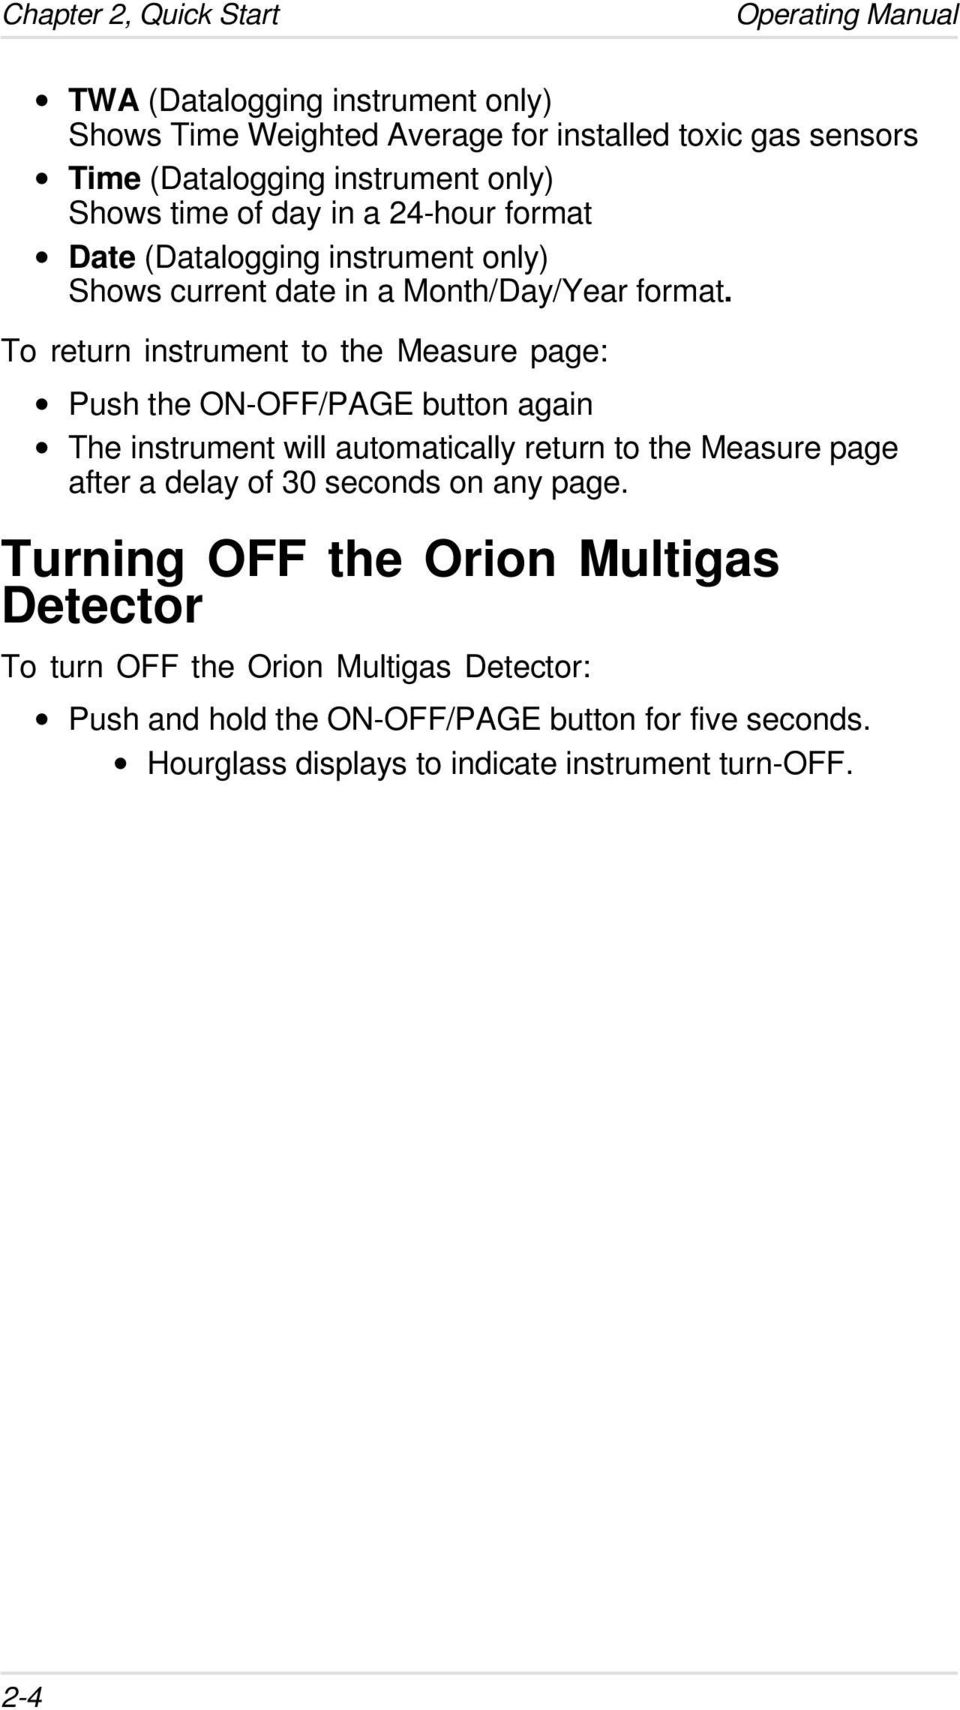 To return instrument to the Measure page: Push the ON-OFF/PAGE button again The instrument will automatically return to the Measure page after a delay of 30 seconds